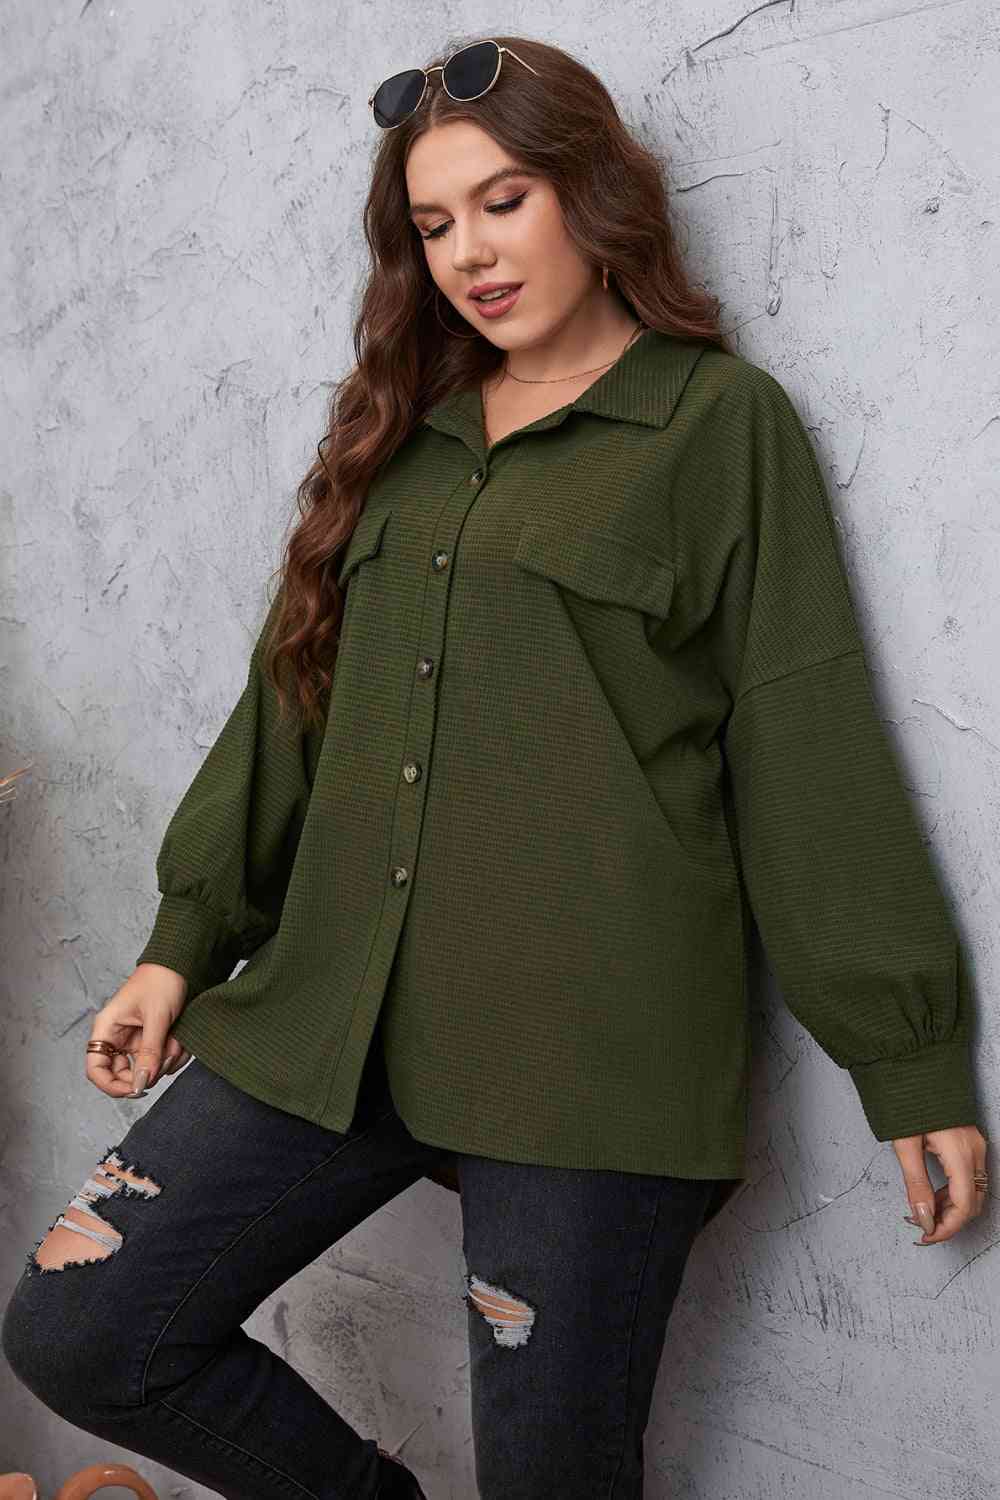 Melo Apparel Plus Size Dropped Shoulder Shirt - Just Enuff Sexy